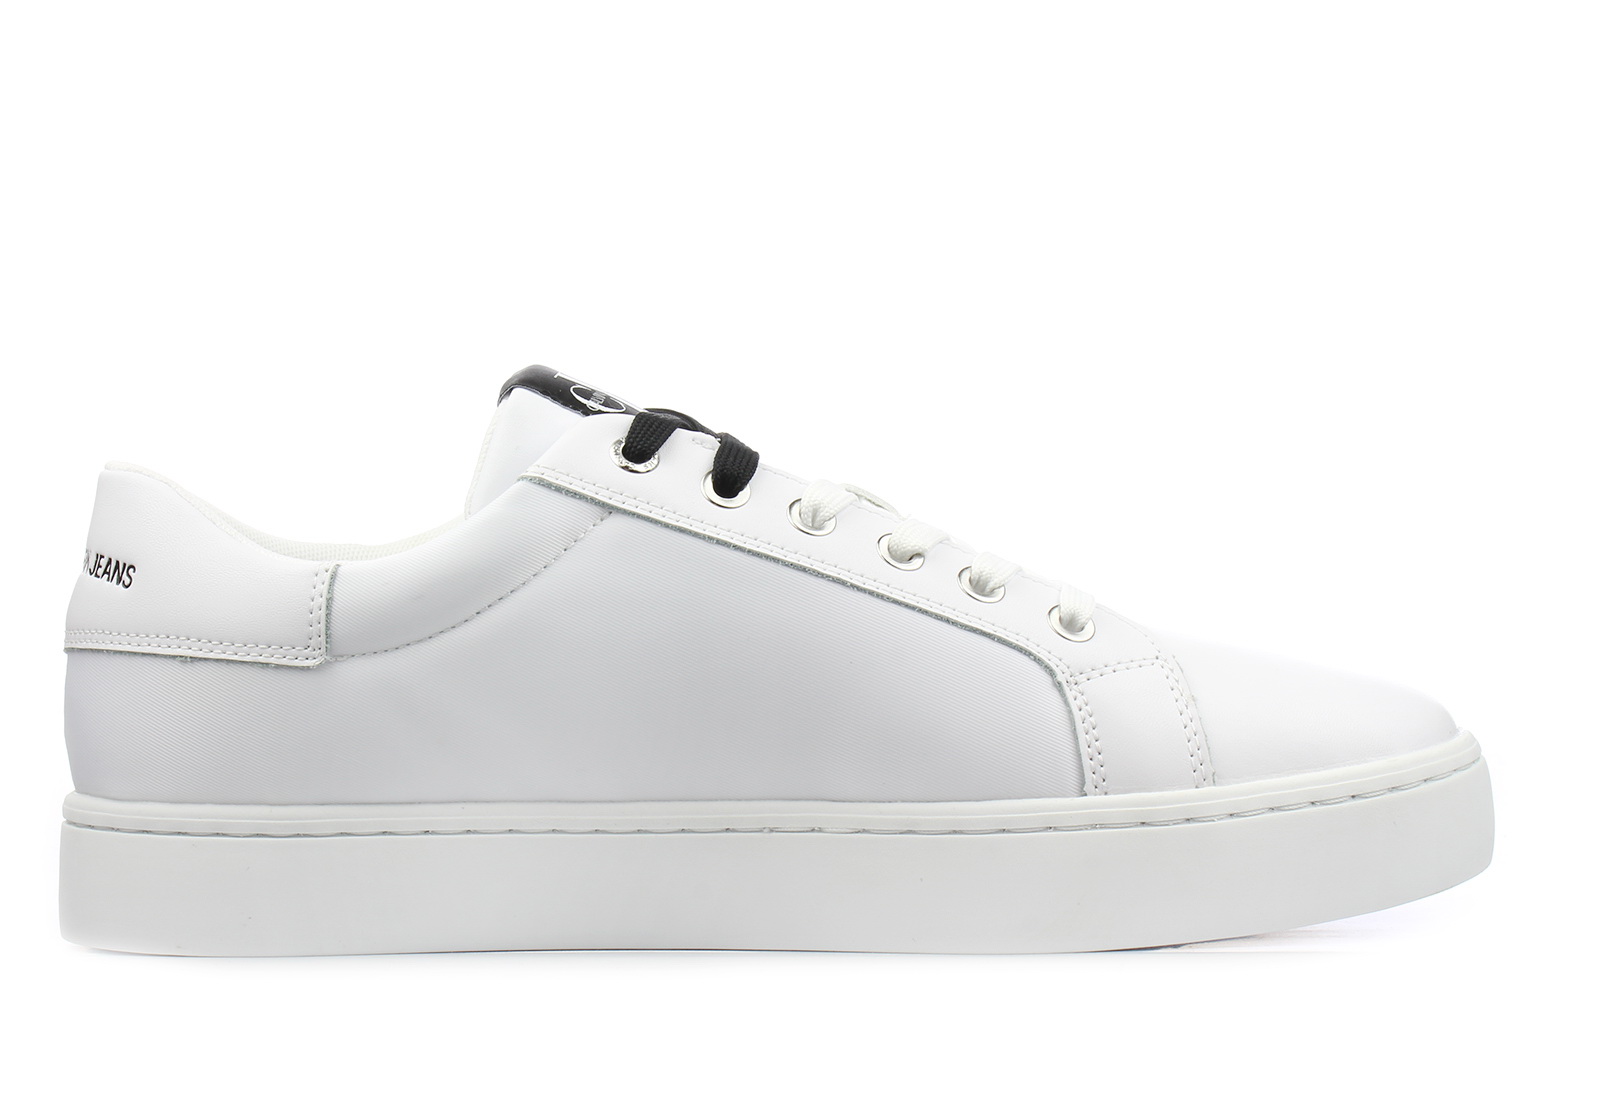 Calvin Klein Trainers - Stephan - YM00029-YAF - Online shop for ...